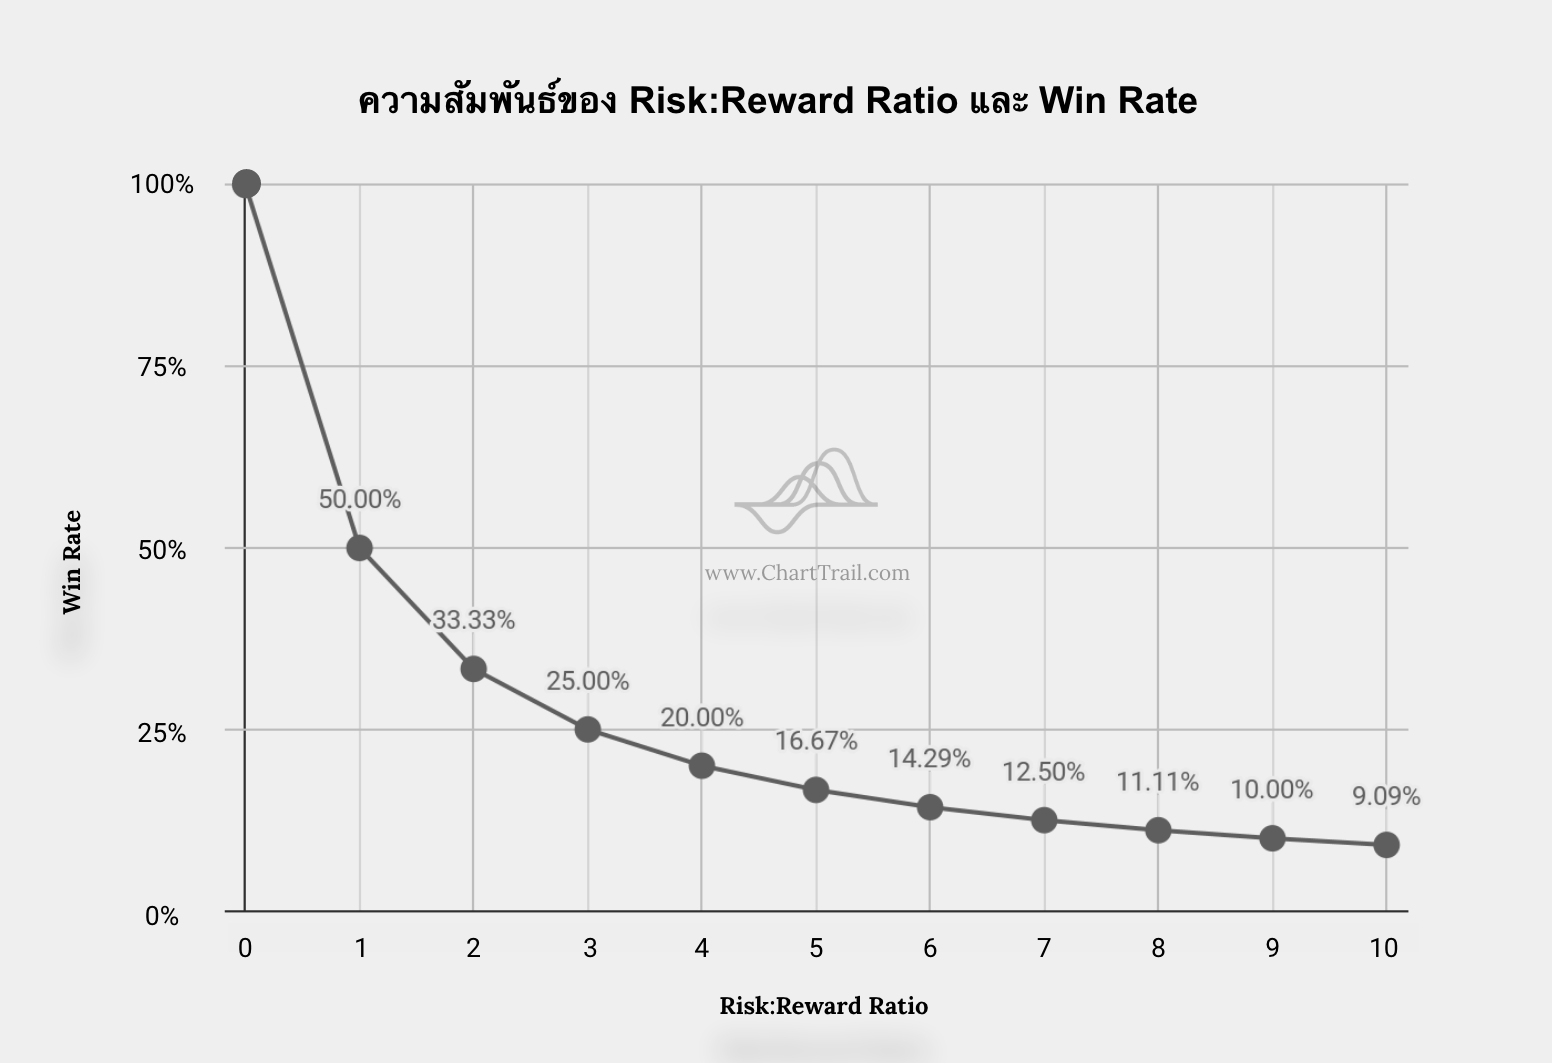 Risk Reward Ratio and Win Rate Relationship